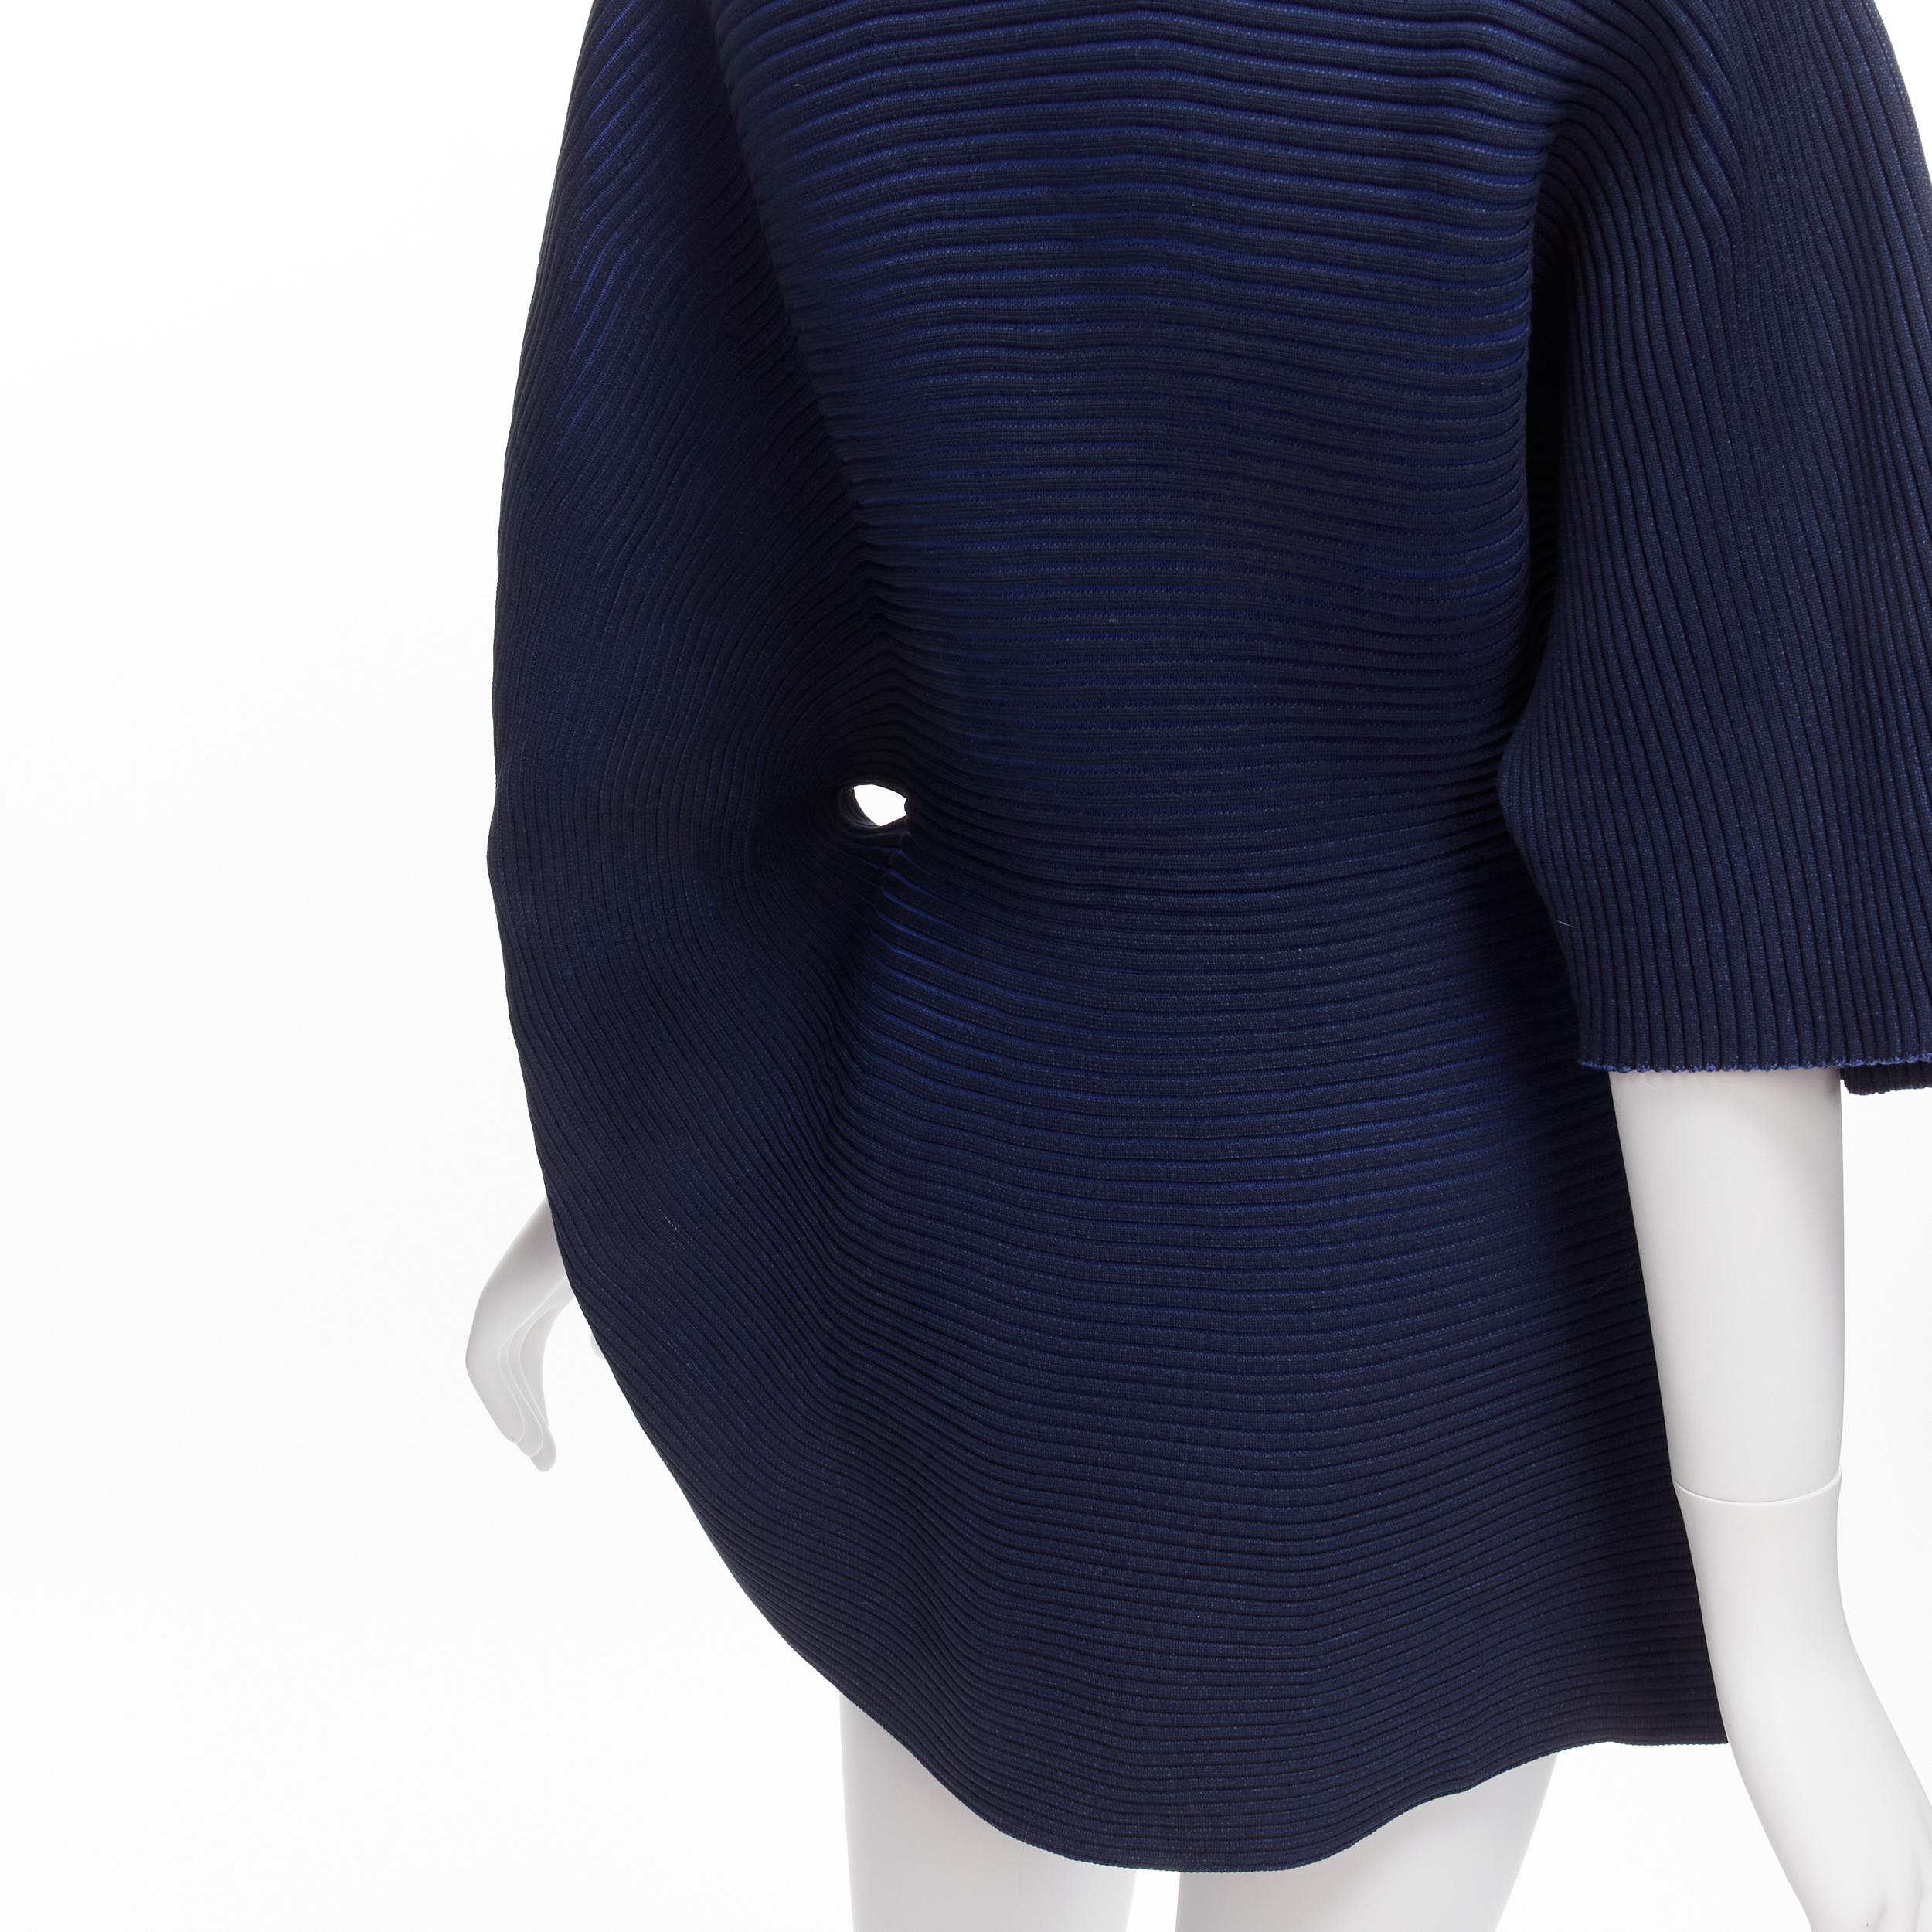 ISSEY MIYAKE 2022 dark blue ribbed knit 3D circle midriff cutout drape top JP2 M
Reference: TGAS/D00122
Brand: issey Miyake
Collection: Spring 2022
Material: Polyester
Color: Blue
Pattern: Solid
Closure: Slip On
Extra Details: Fabric looks different